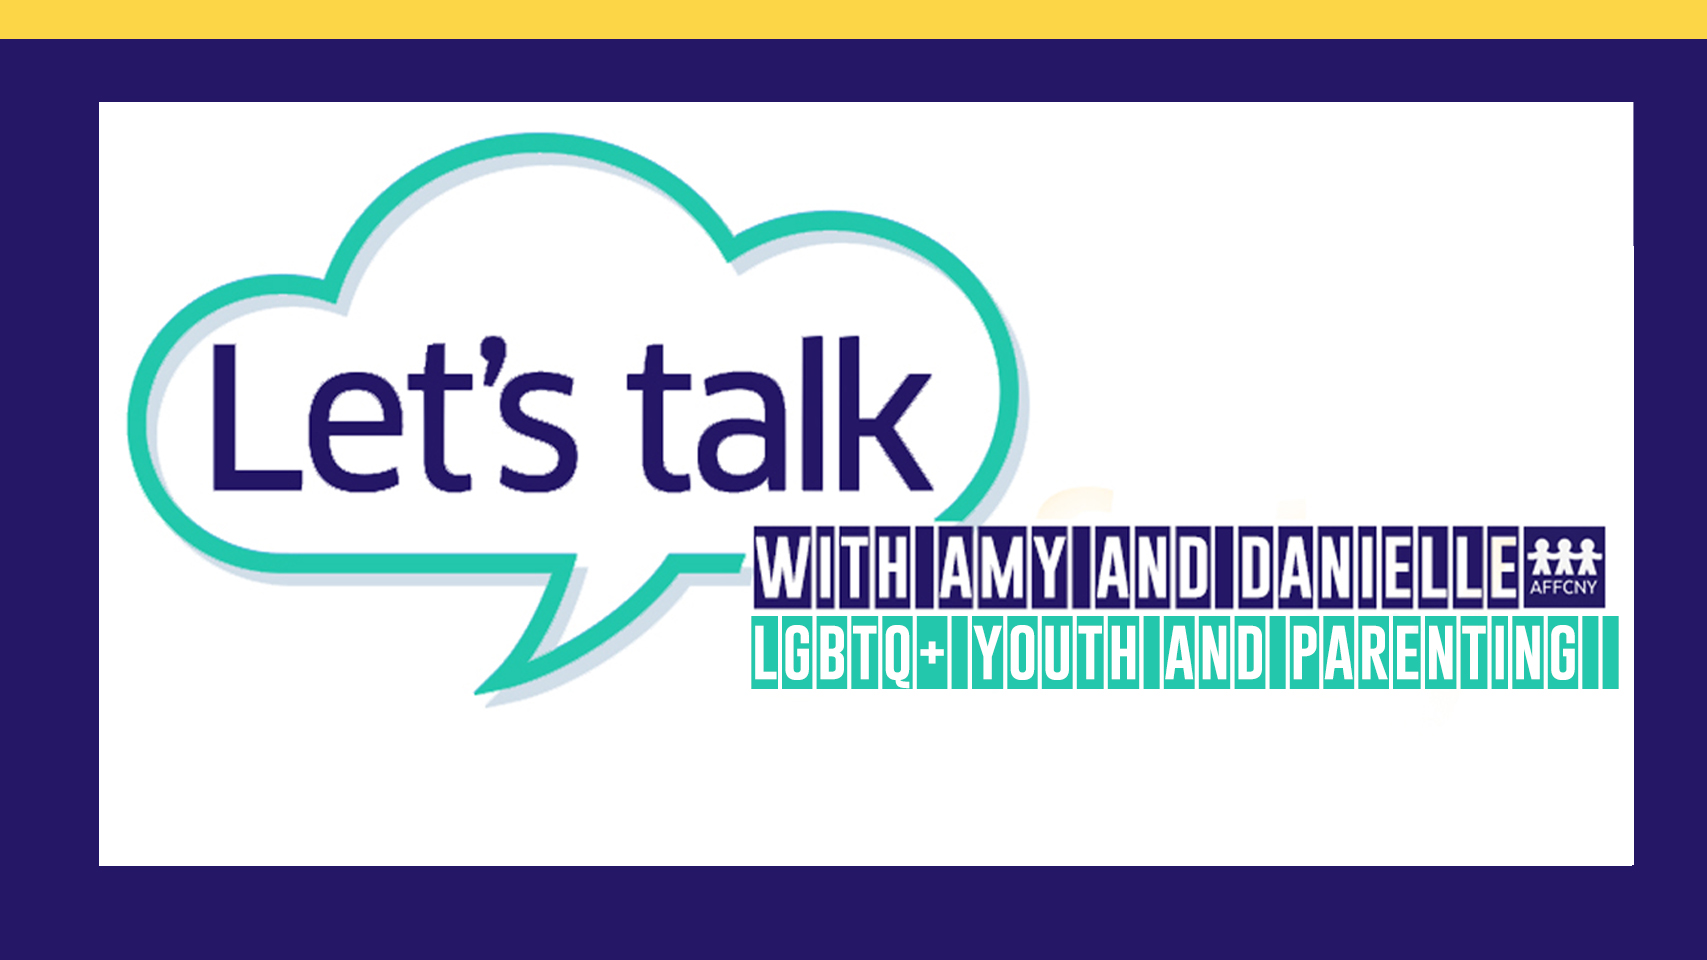 Let's Talk LGBTQ+ YOUTH AND PARENTING with Amy and Danielle